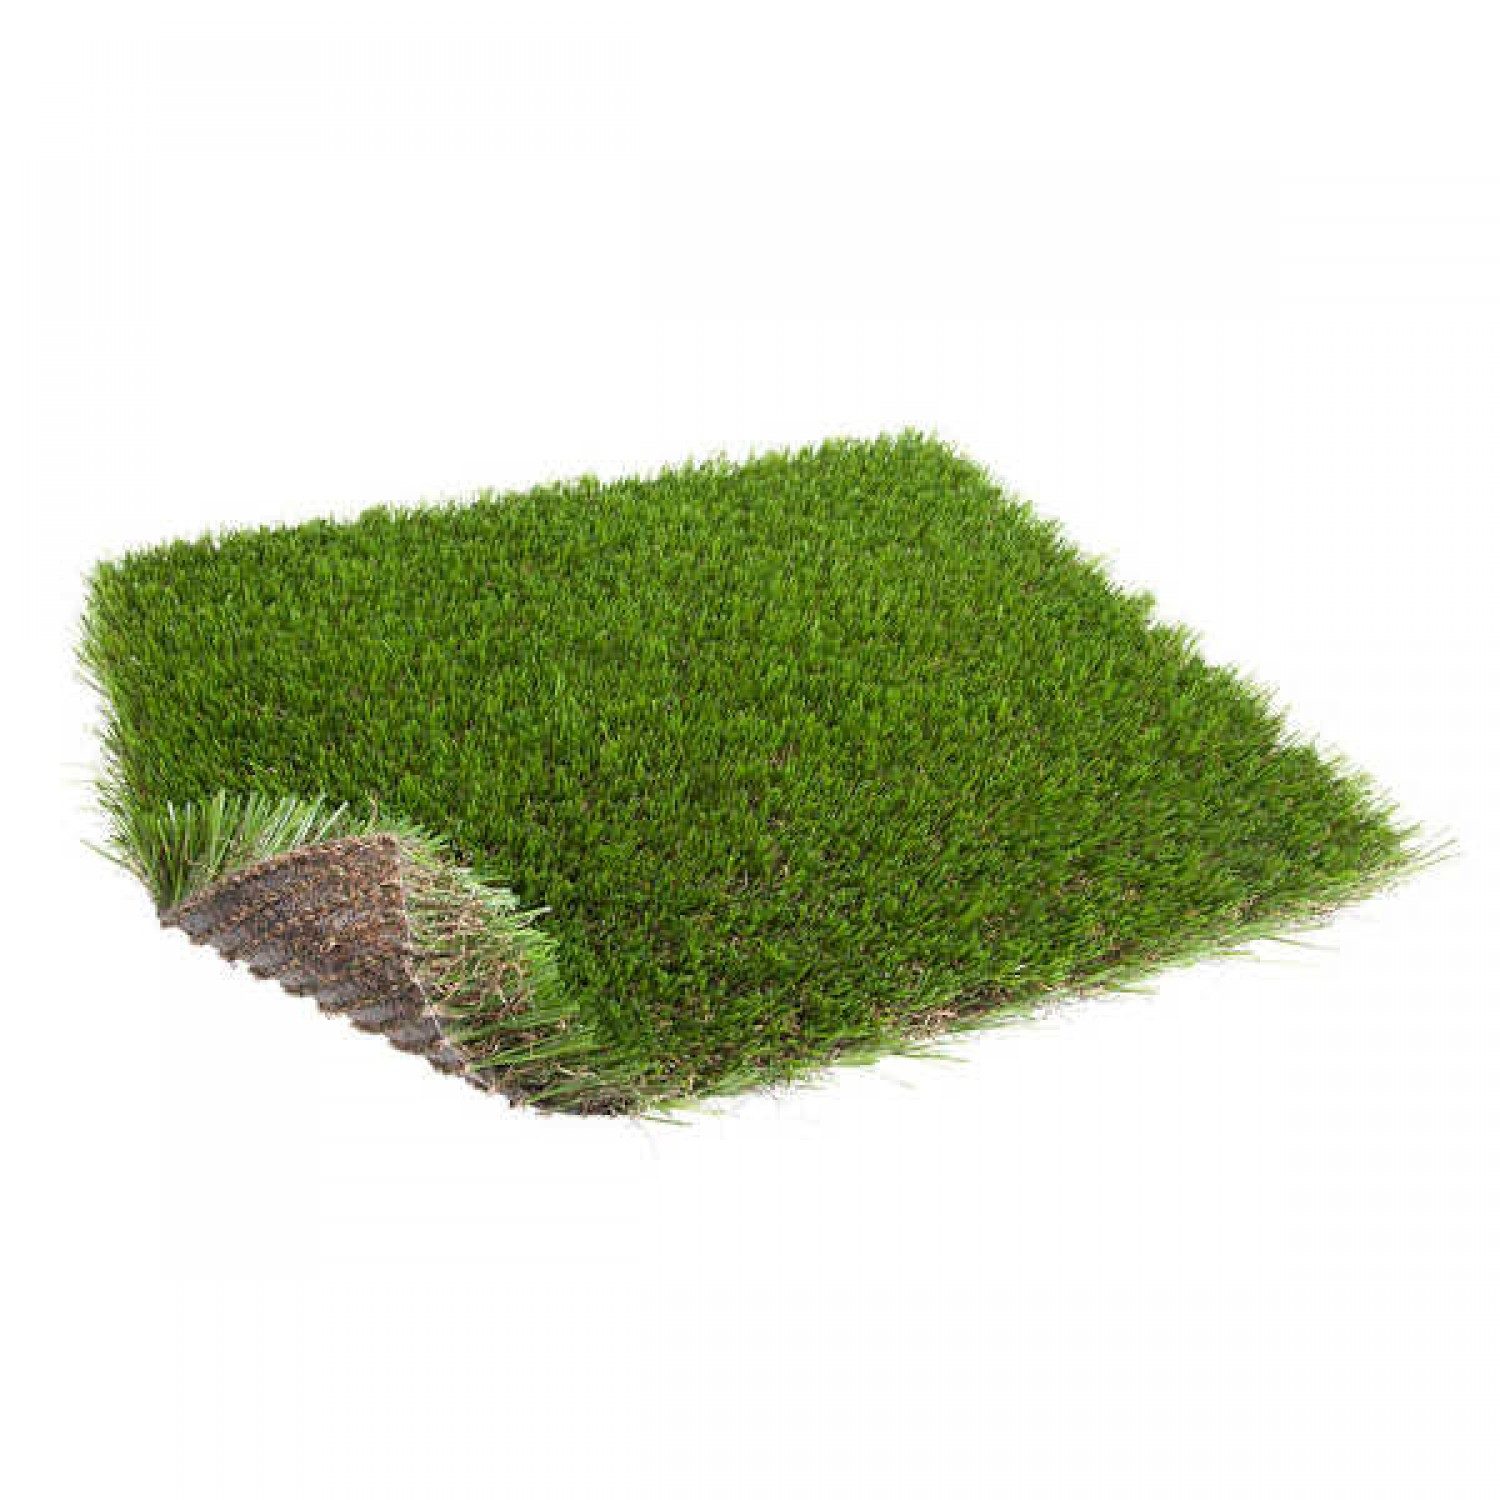 Artificial Lawn Euphoria 40mm by Square Meter